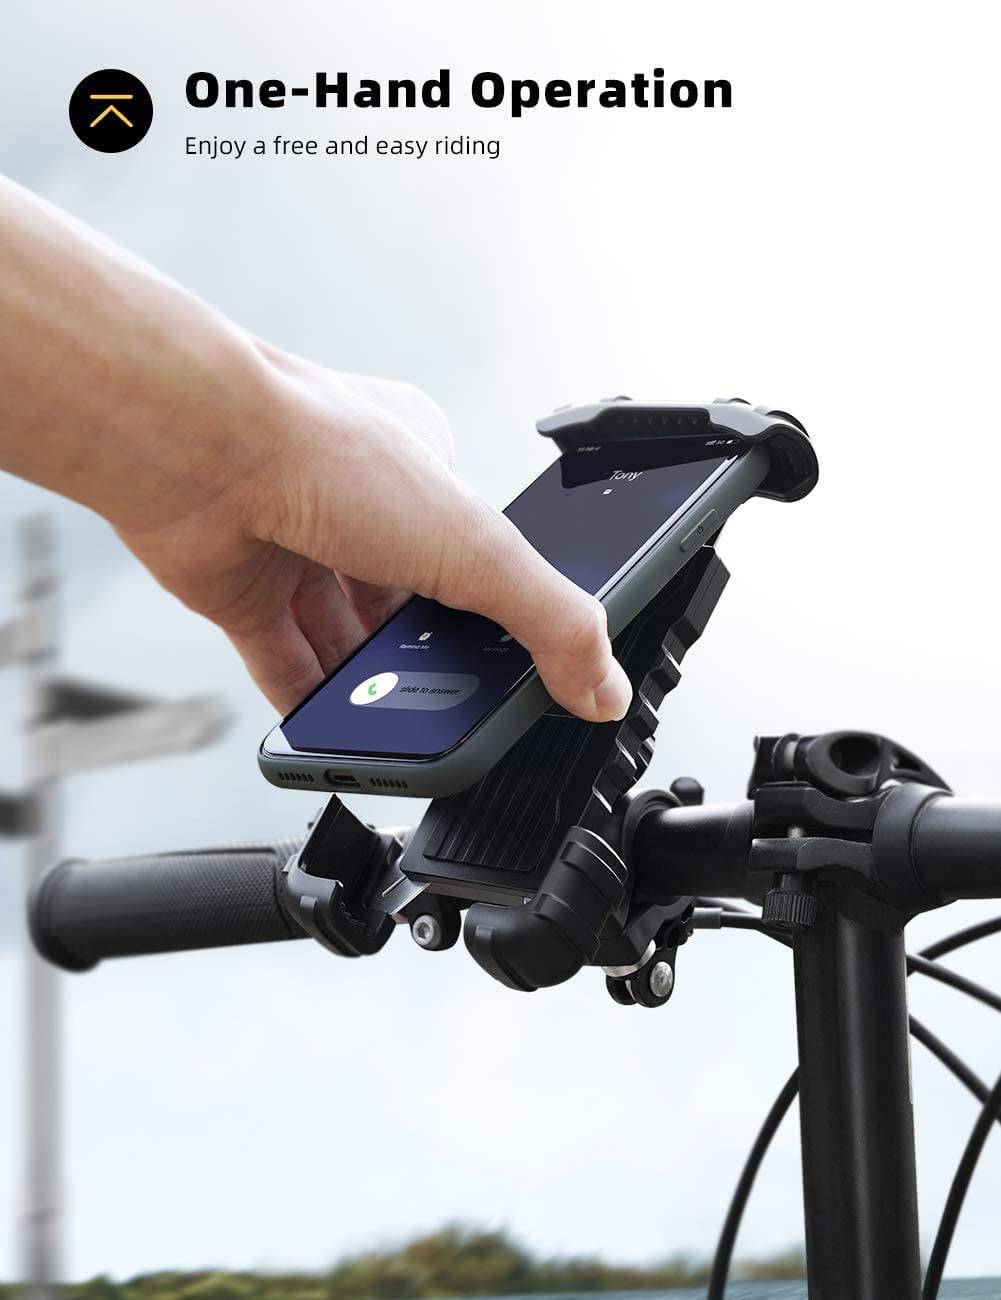 Motorcycle Phone Mount Bicycle Scooter Handlebar Phone Cradle Clip for iPhone 13 Pro Max Lamicall Adjustable Cell Phone Bike Holder Galaxy S9 and 4.7-6.8 Phone Transparent Bike Phone Holder iPhone 12/ 11 